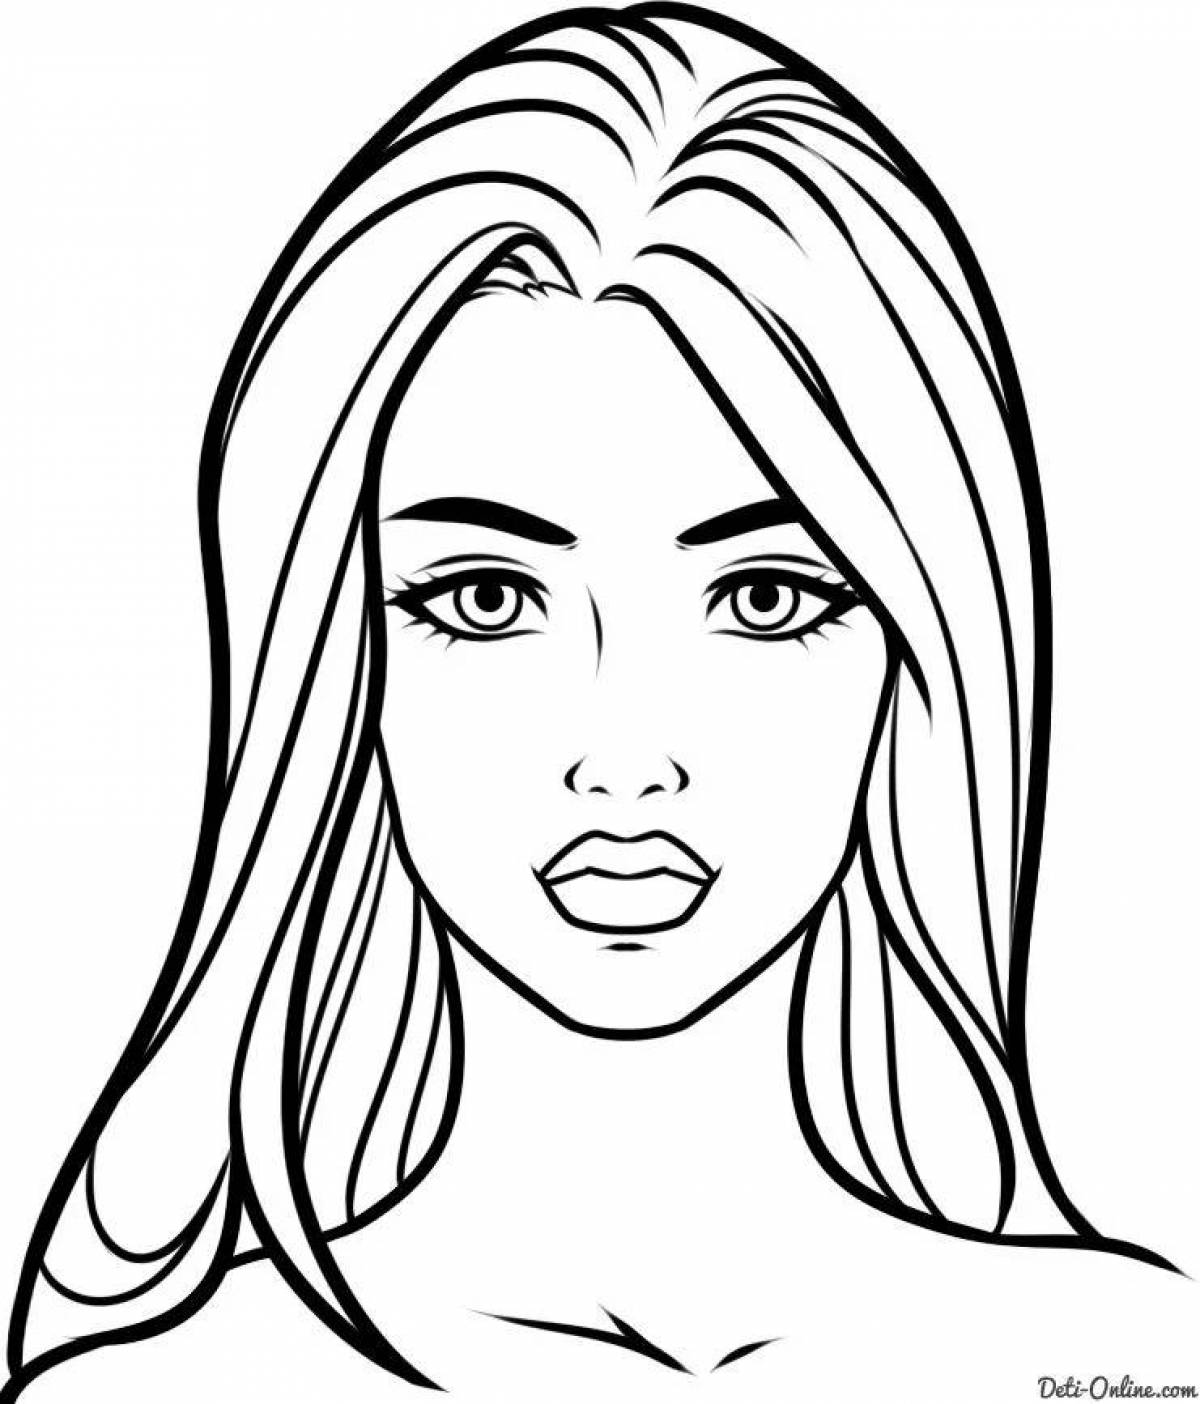 Delightful human face coloring page